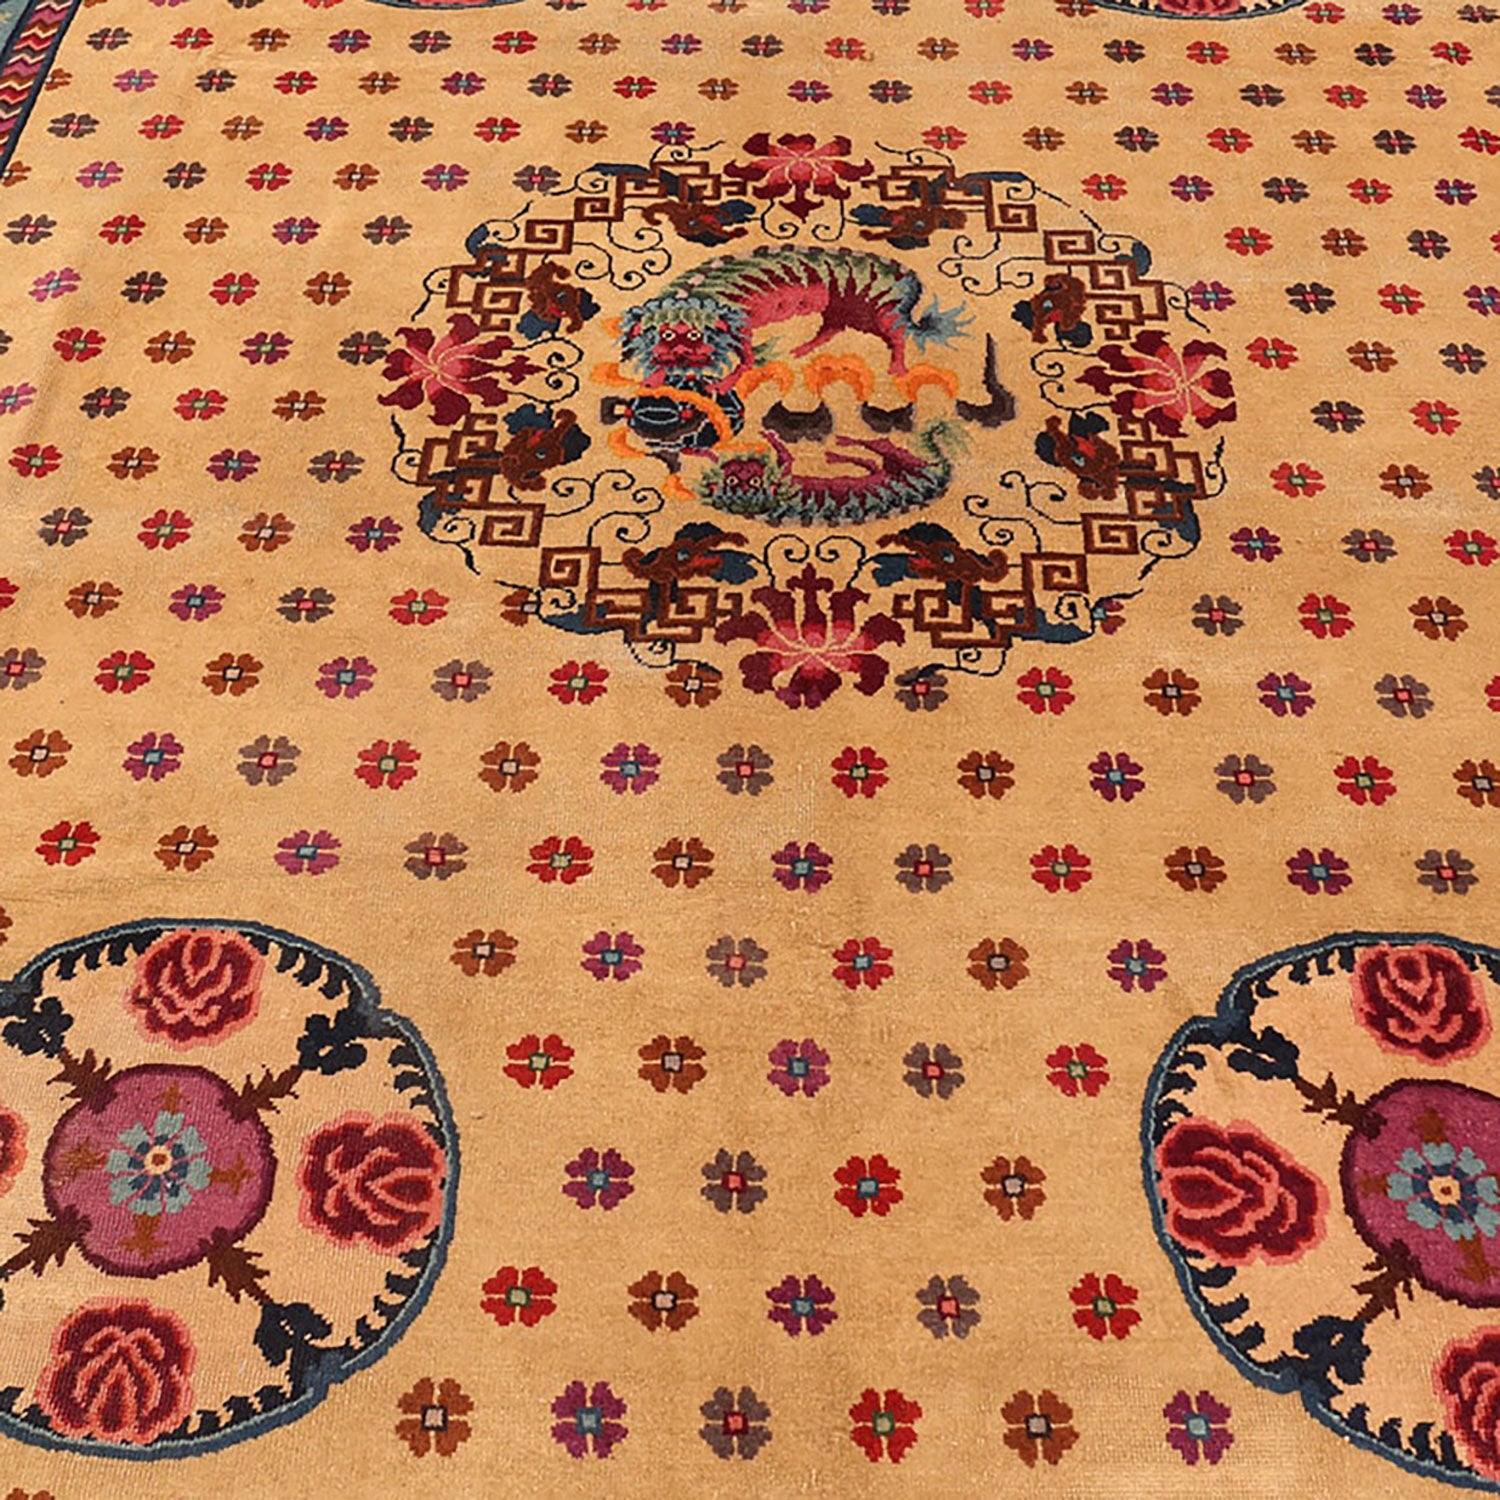 Exquisite traditional carpet showcases vibrant dragon medallion surrounded by intricate motifs.